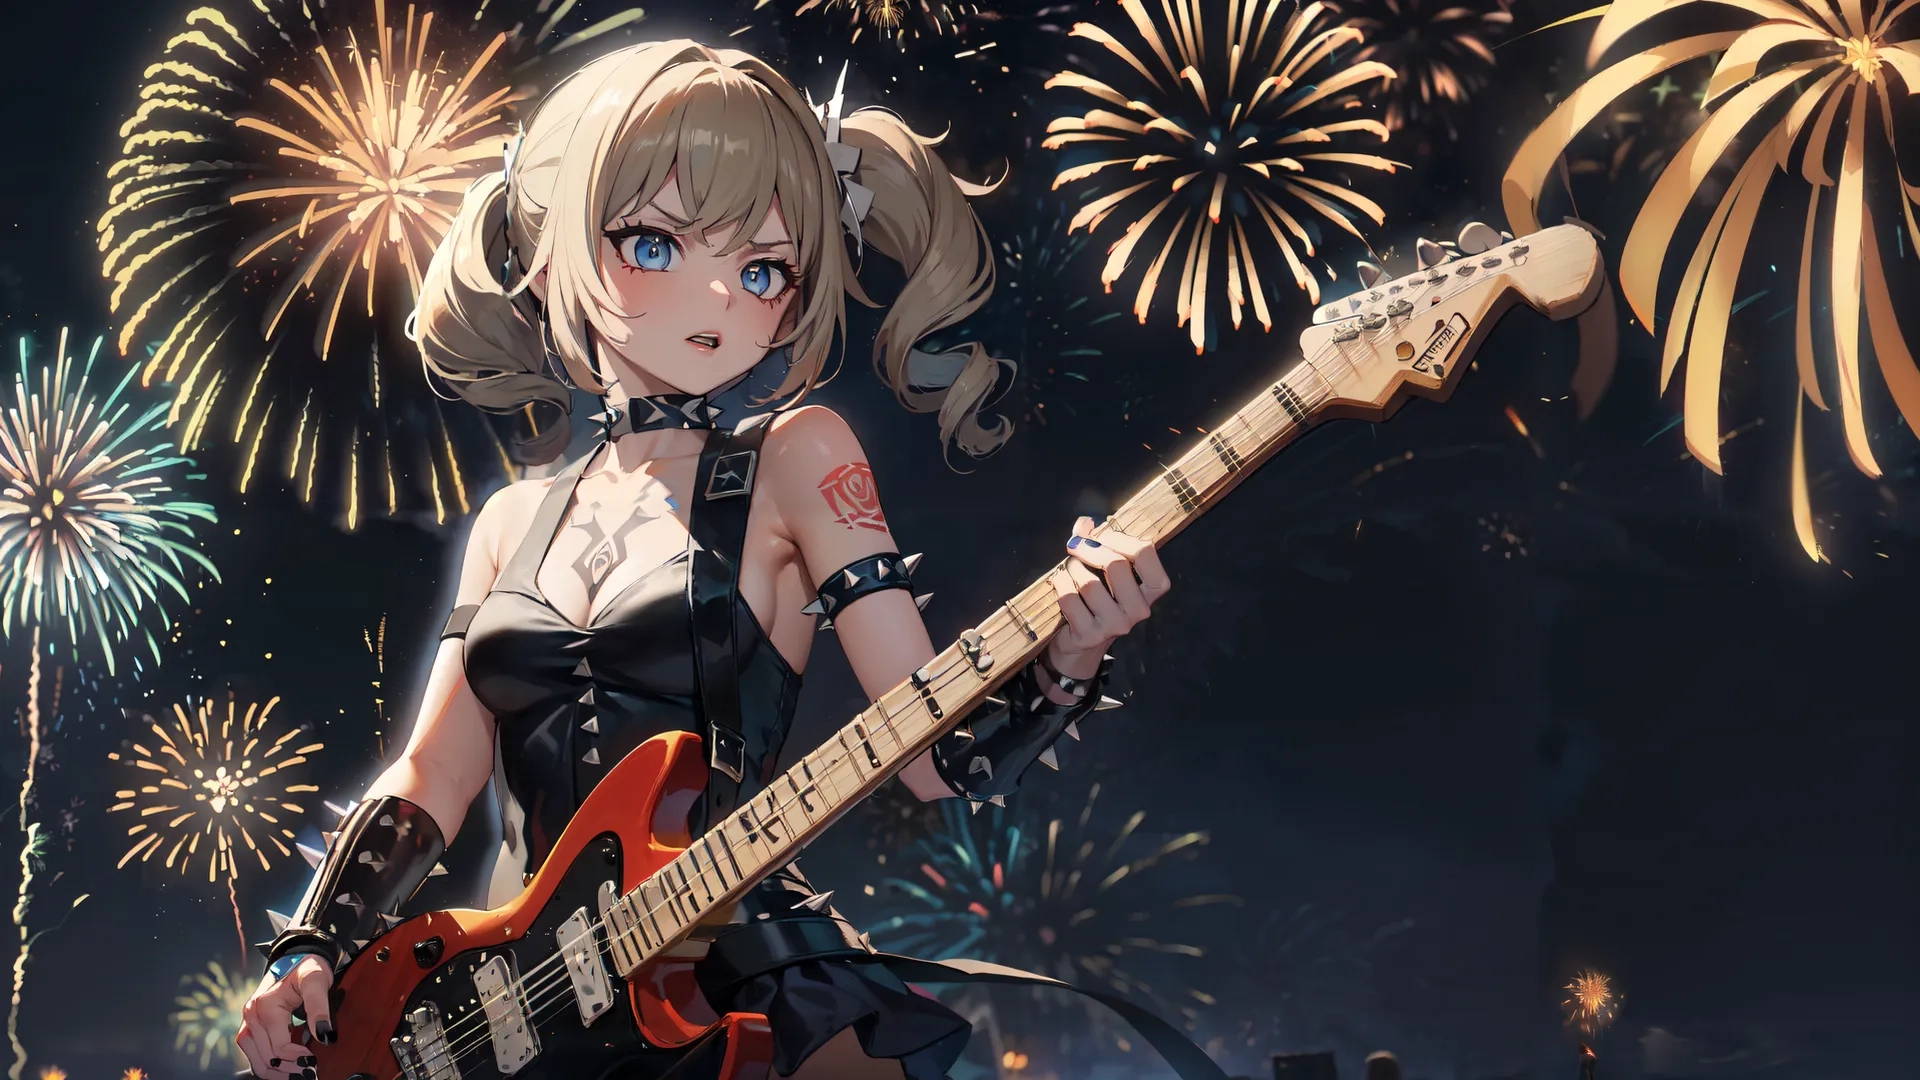 an anime with blonde hair and blue eyes is playing guitar near firework on nighttime sky background area with people and fireworks display in foreground
